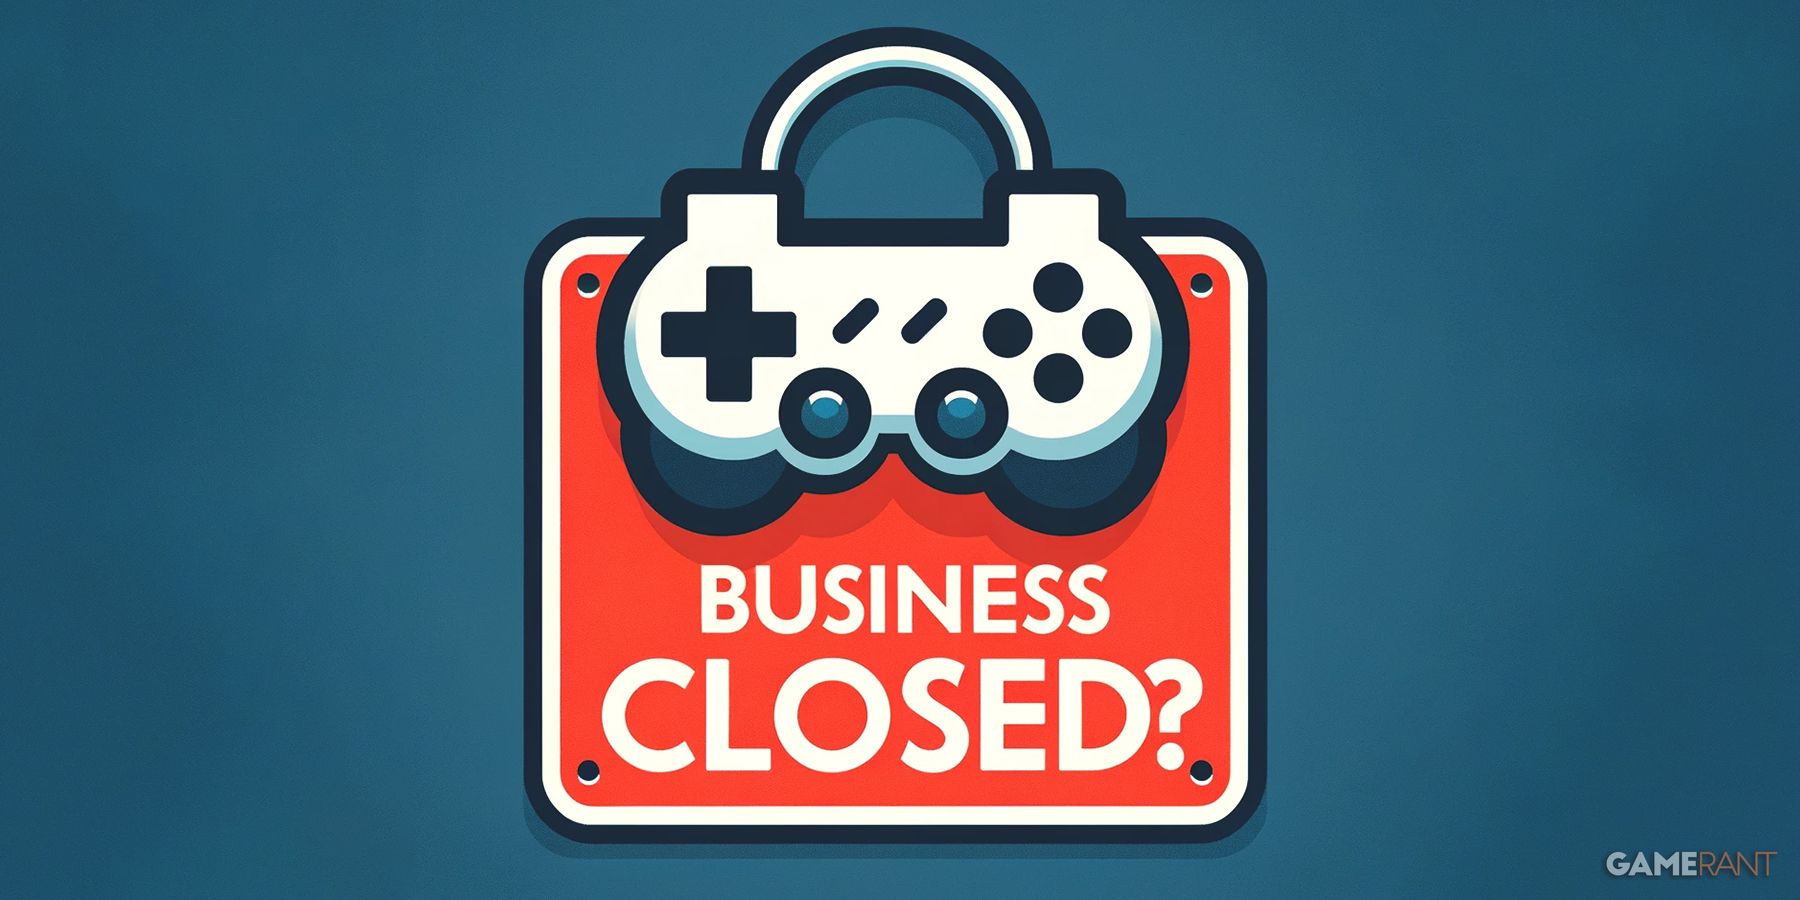 Business Closed lock sign with gamepad controller flat graphic GR